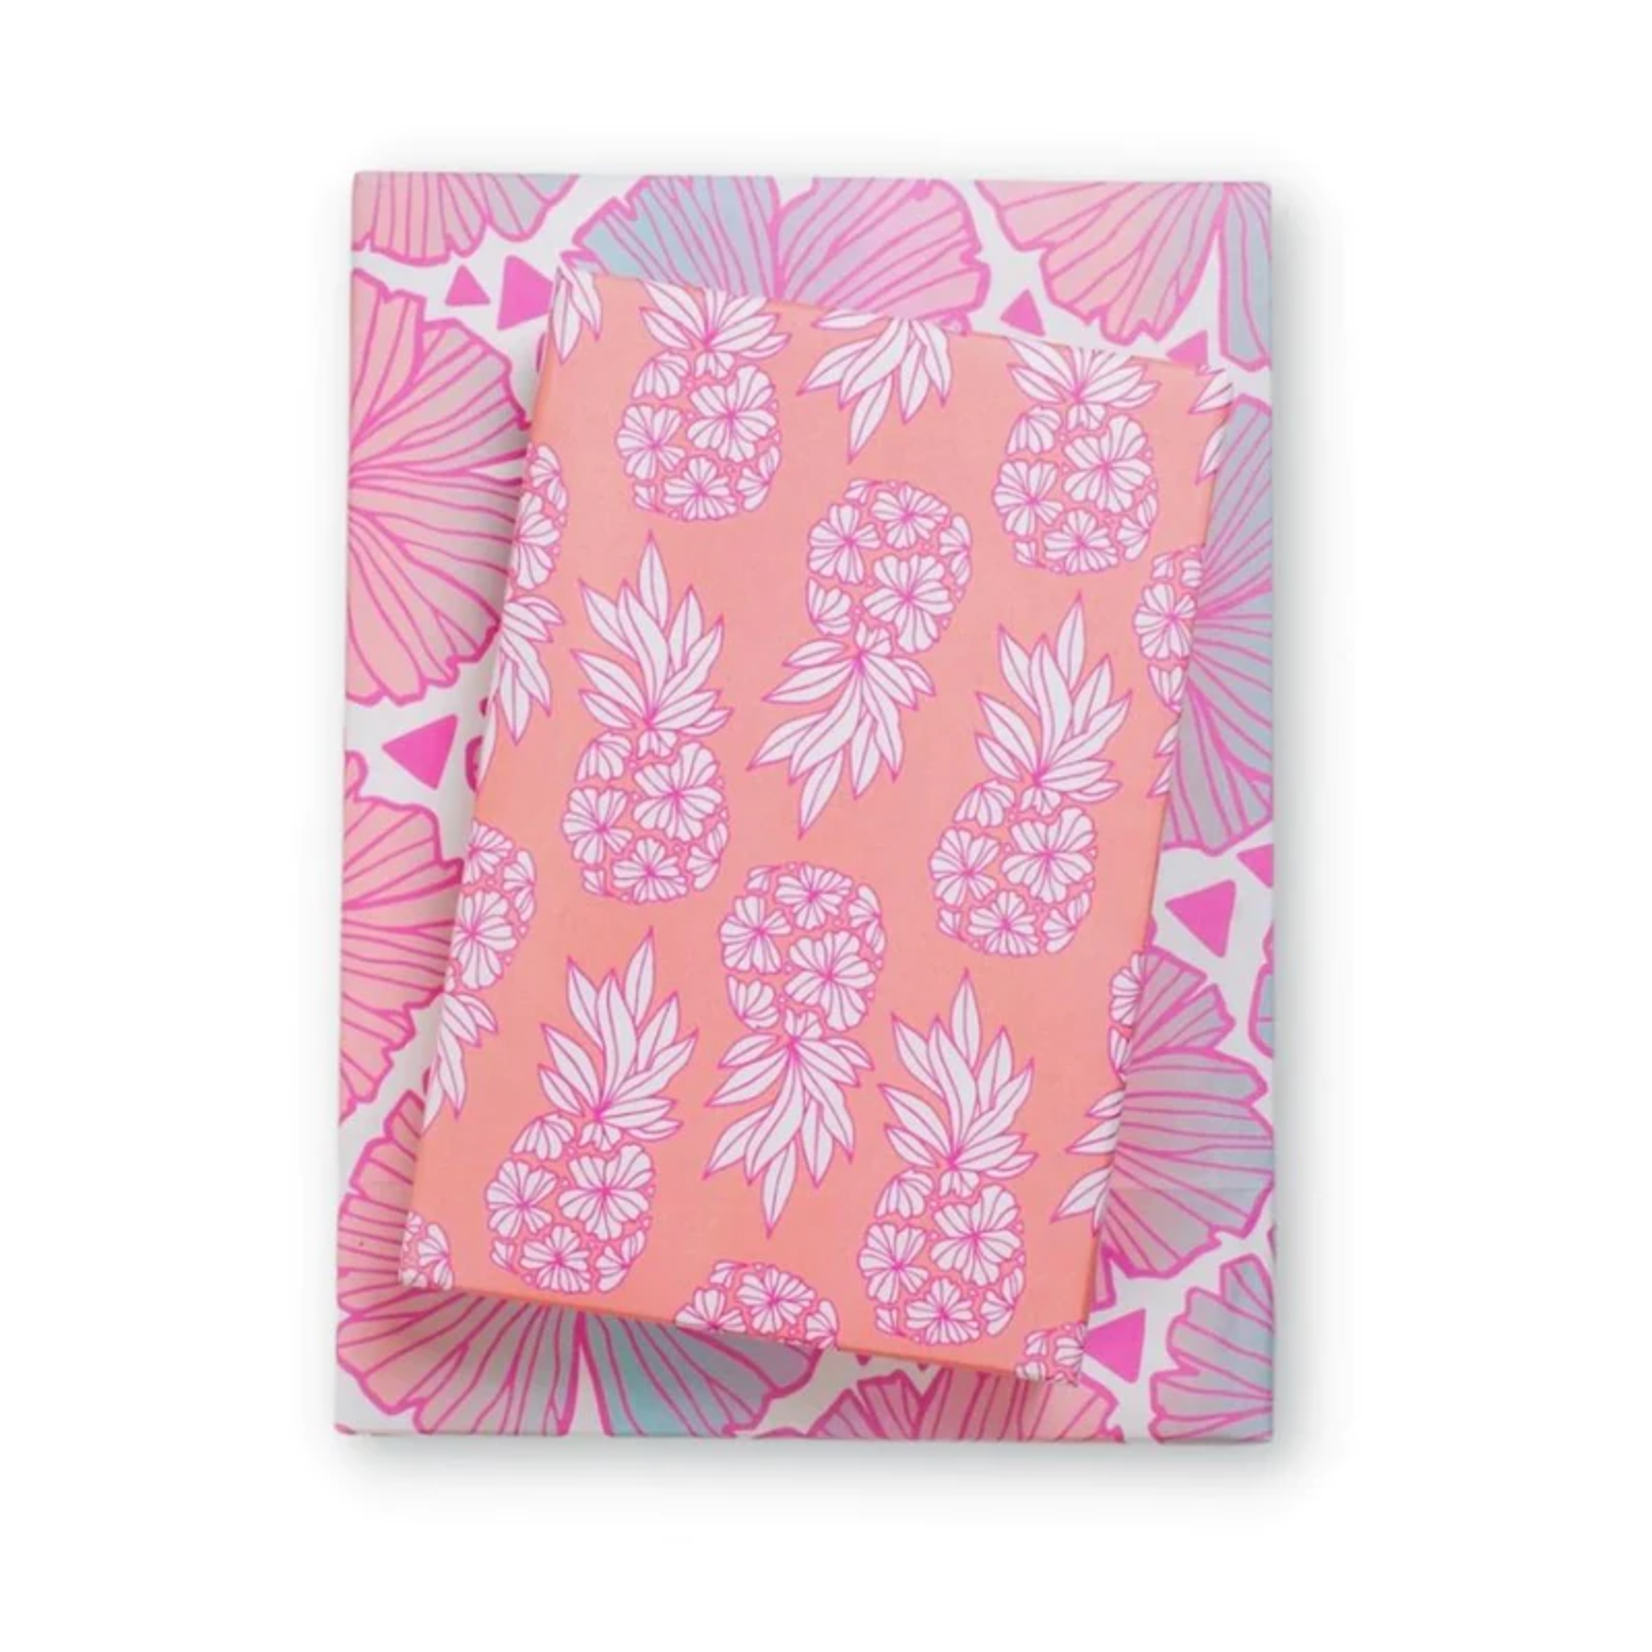 Wrappily 3-Pk Wrappily Wrapping Paper